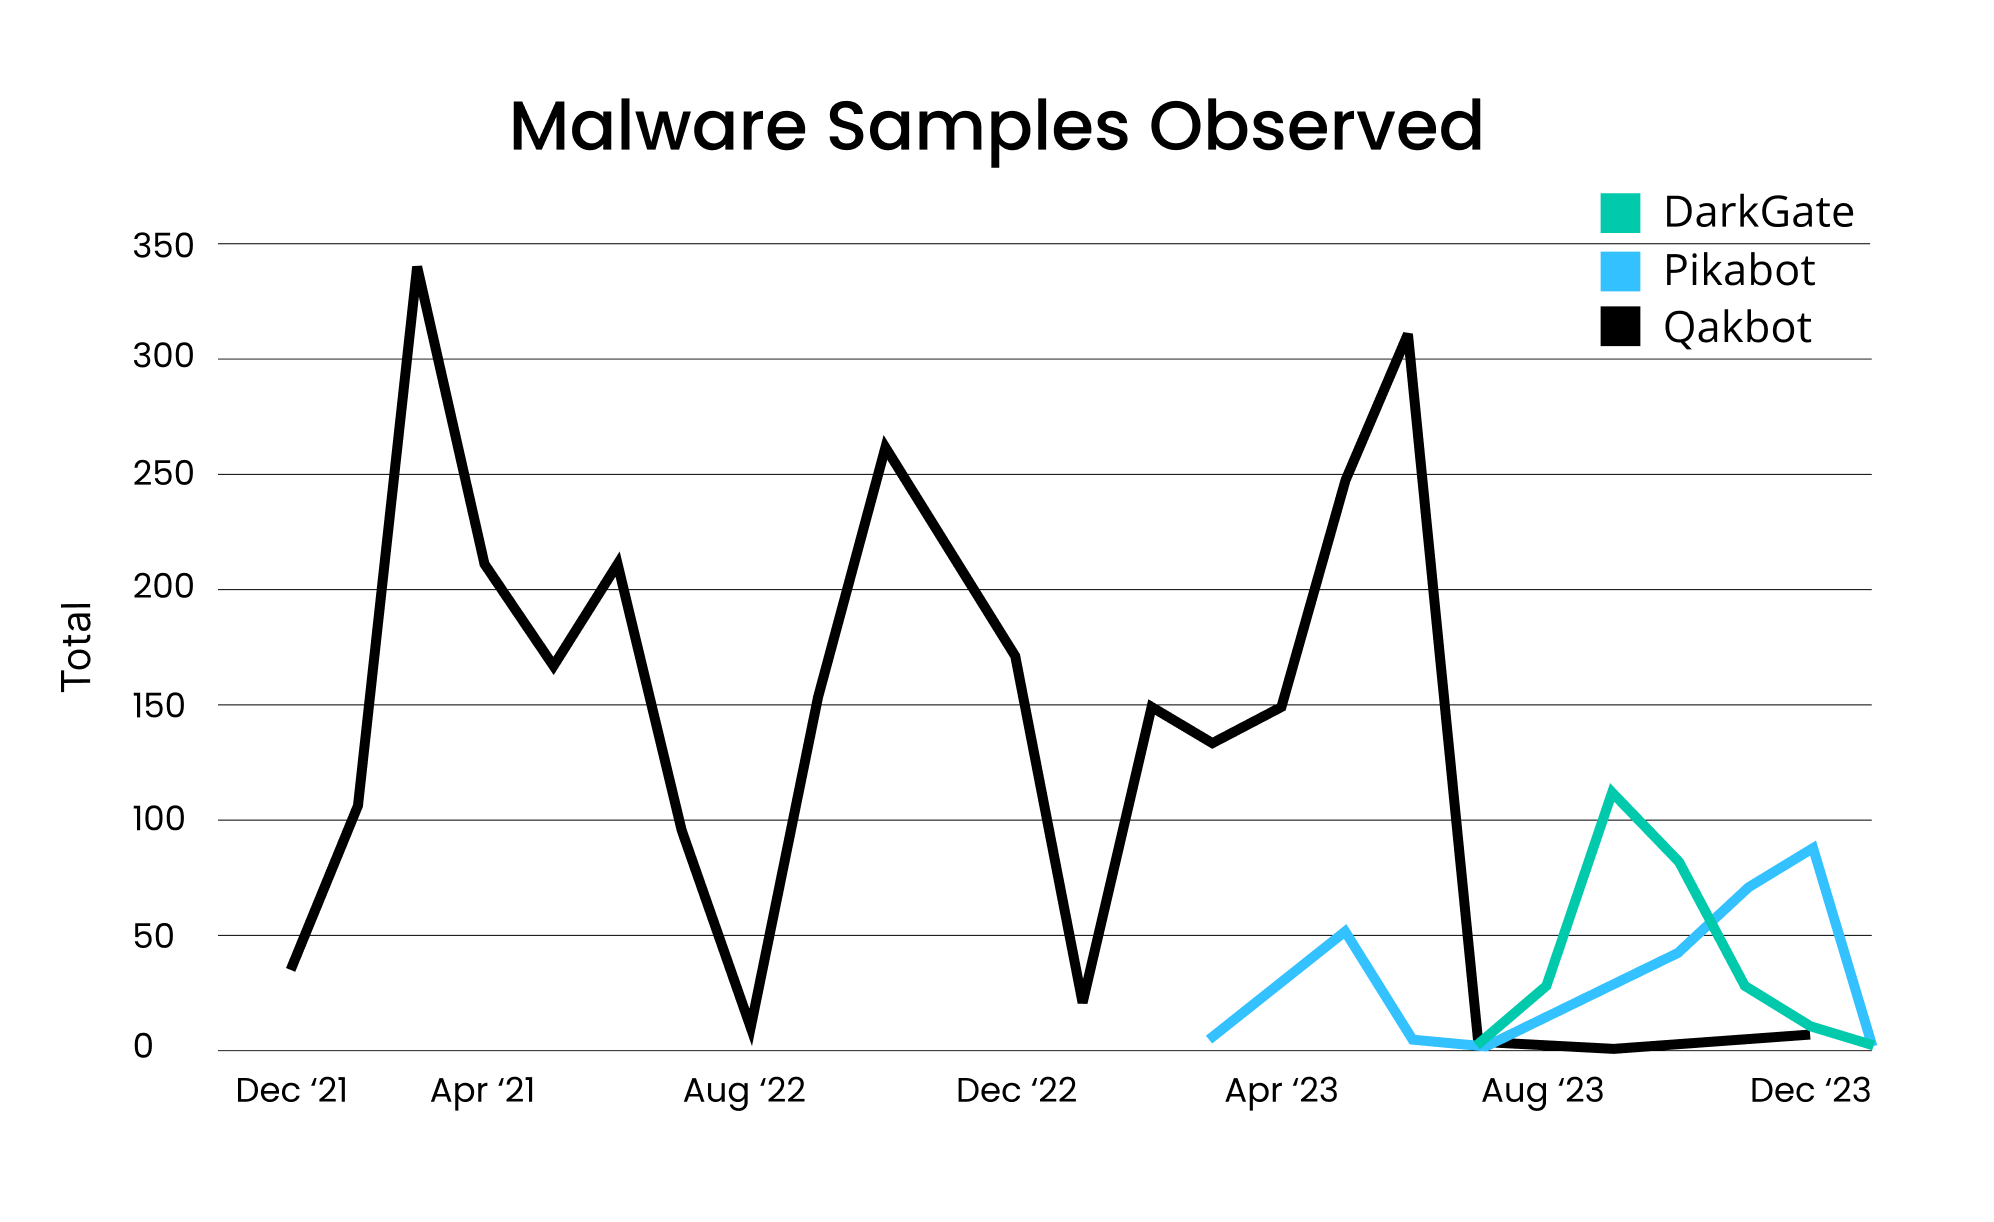 [LINE GRAPH] Malware Submissions from December 2021 to December 2023